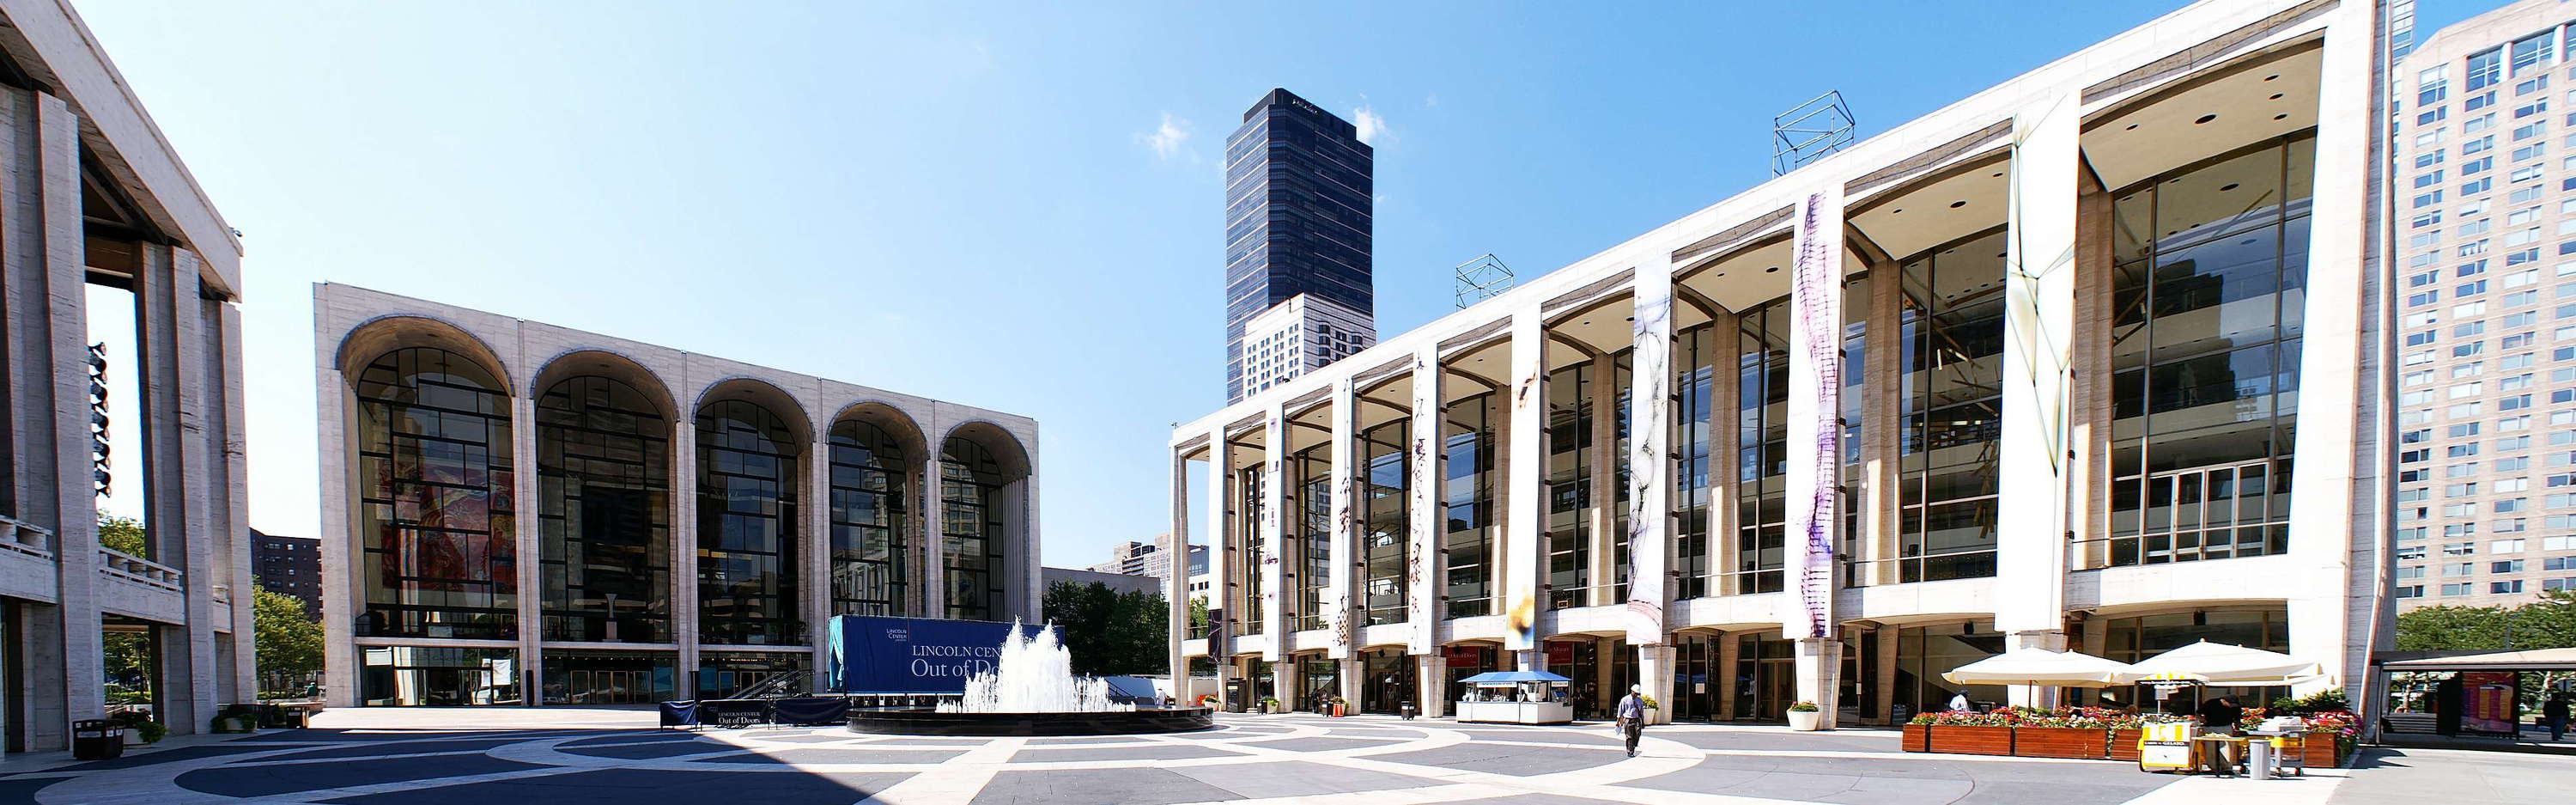 Upper West Side  |  Panorama of Lincoln Center